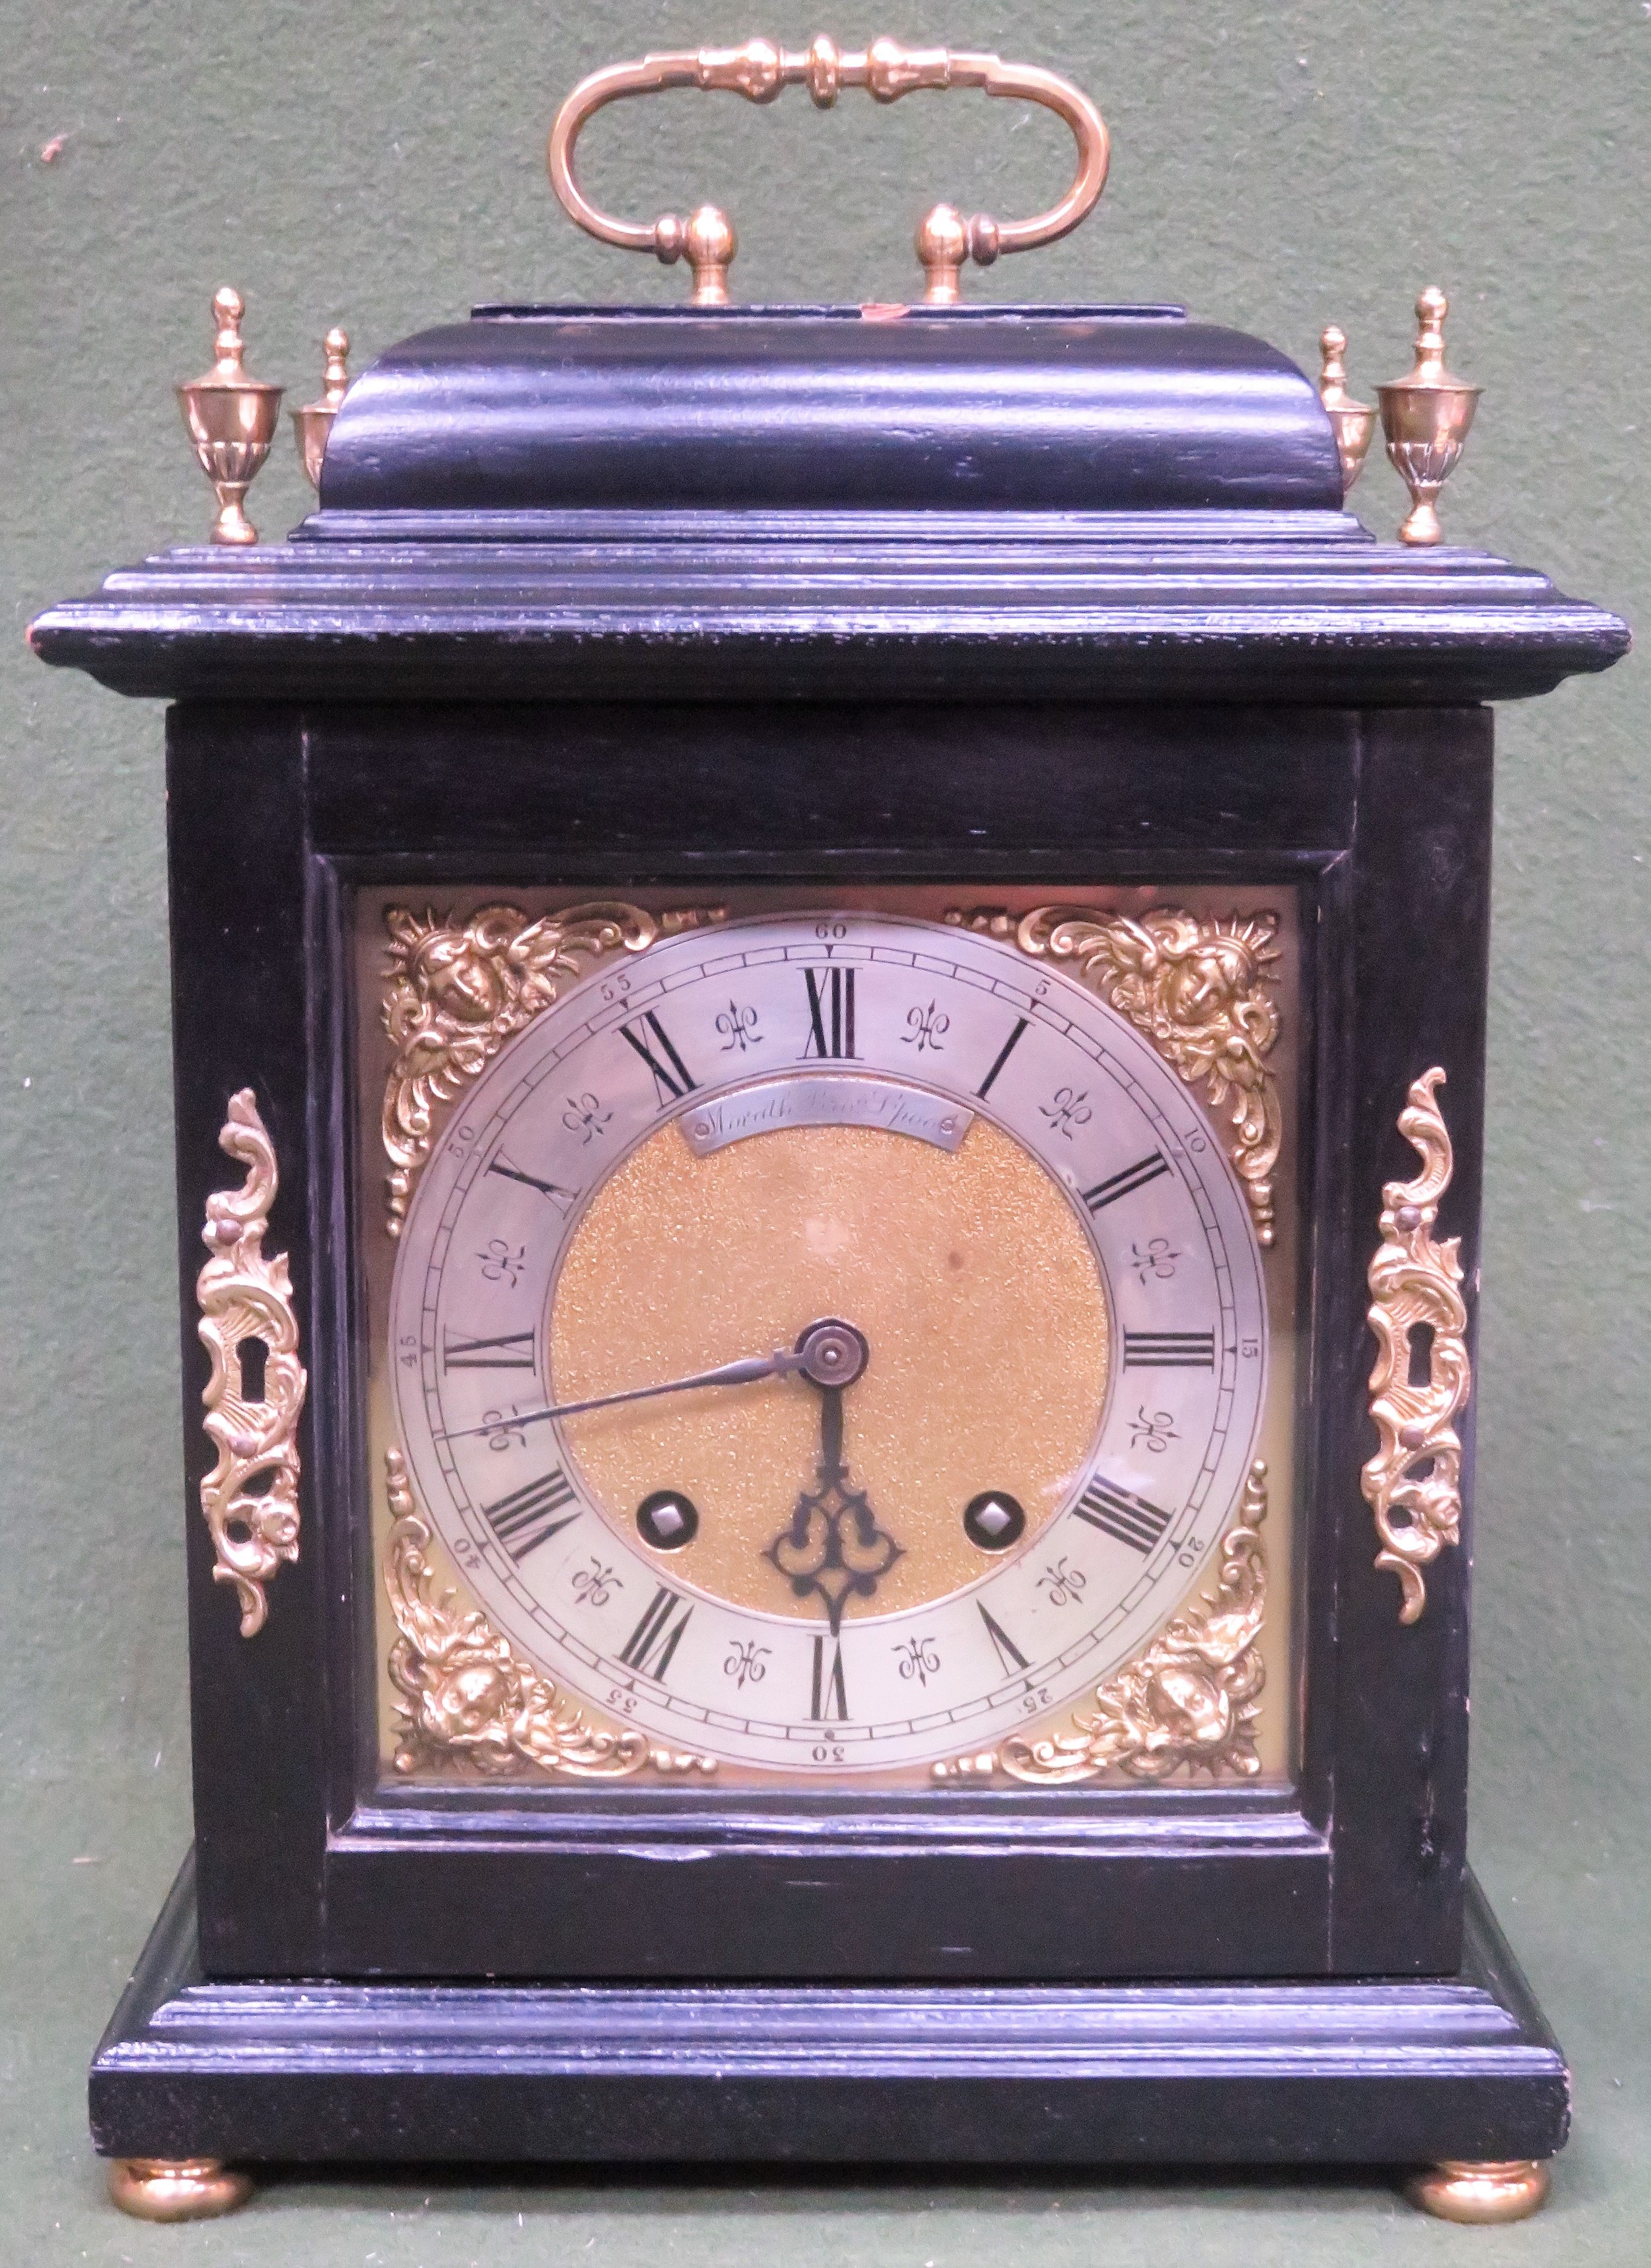 Early 20th century Ebonised Mantle clock, with ormulu brass dial, brass veneer and brass finials, by